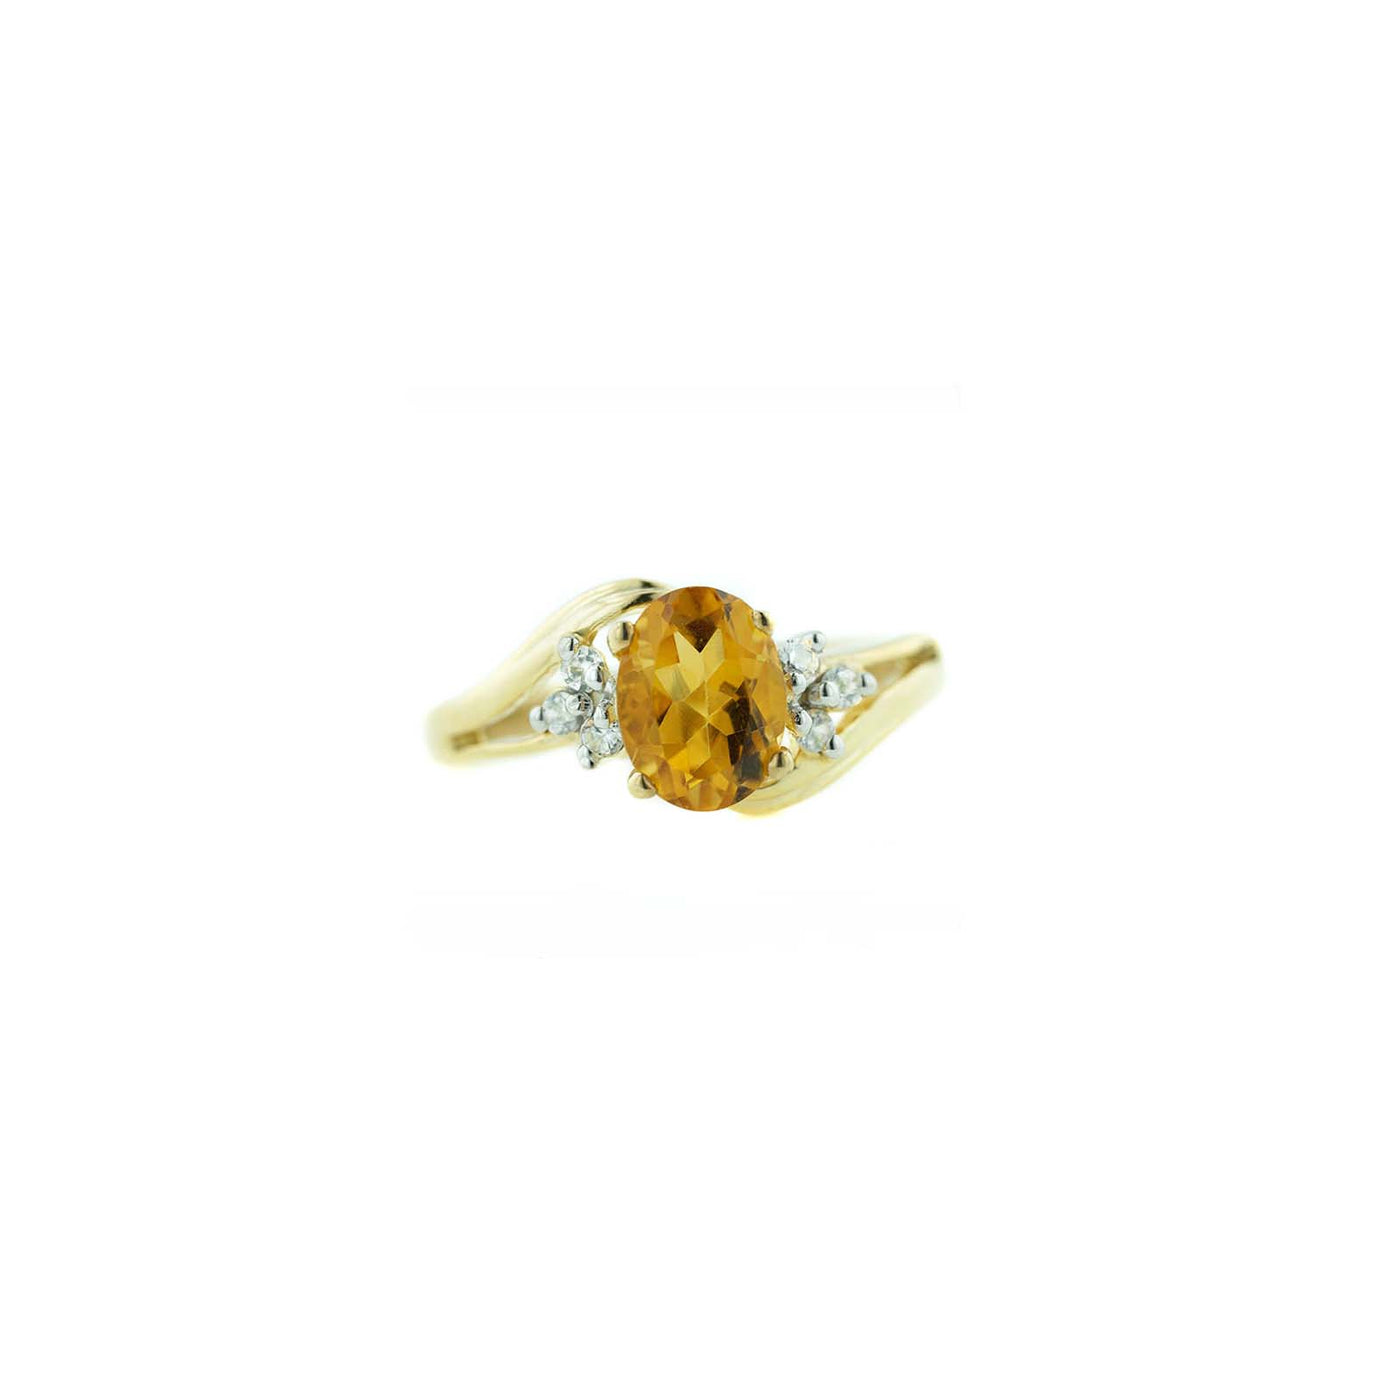 citrine ring, citrine rings, yellow gemstones, gemstone engagement rings, gems and jewels, jewlr, jewels jewels, jewels for me